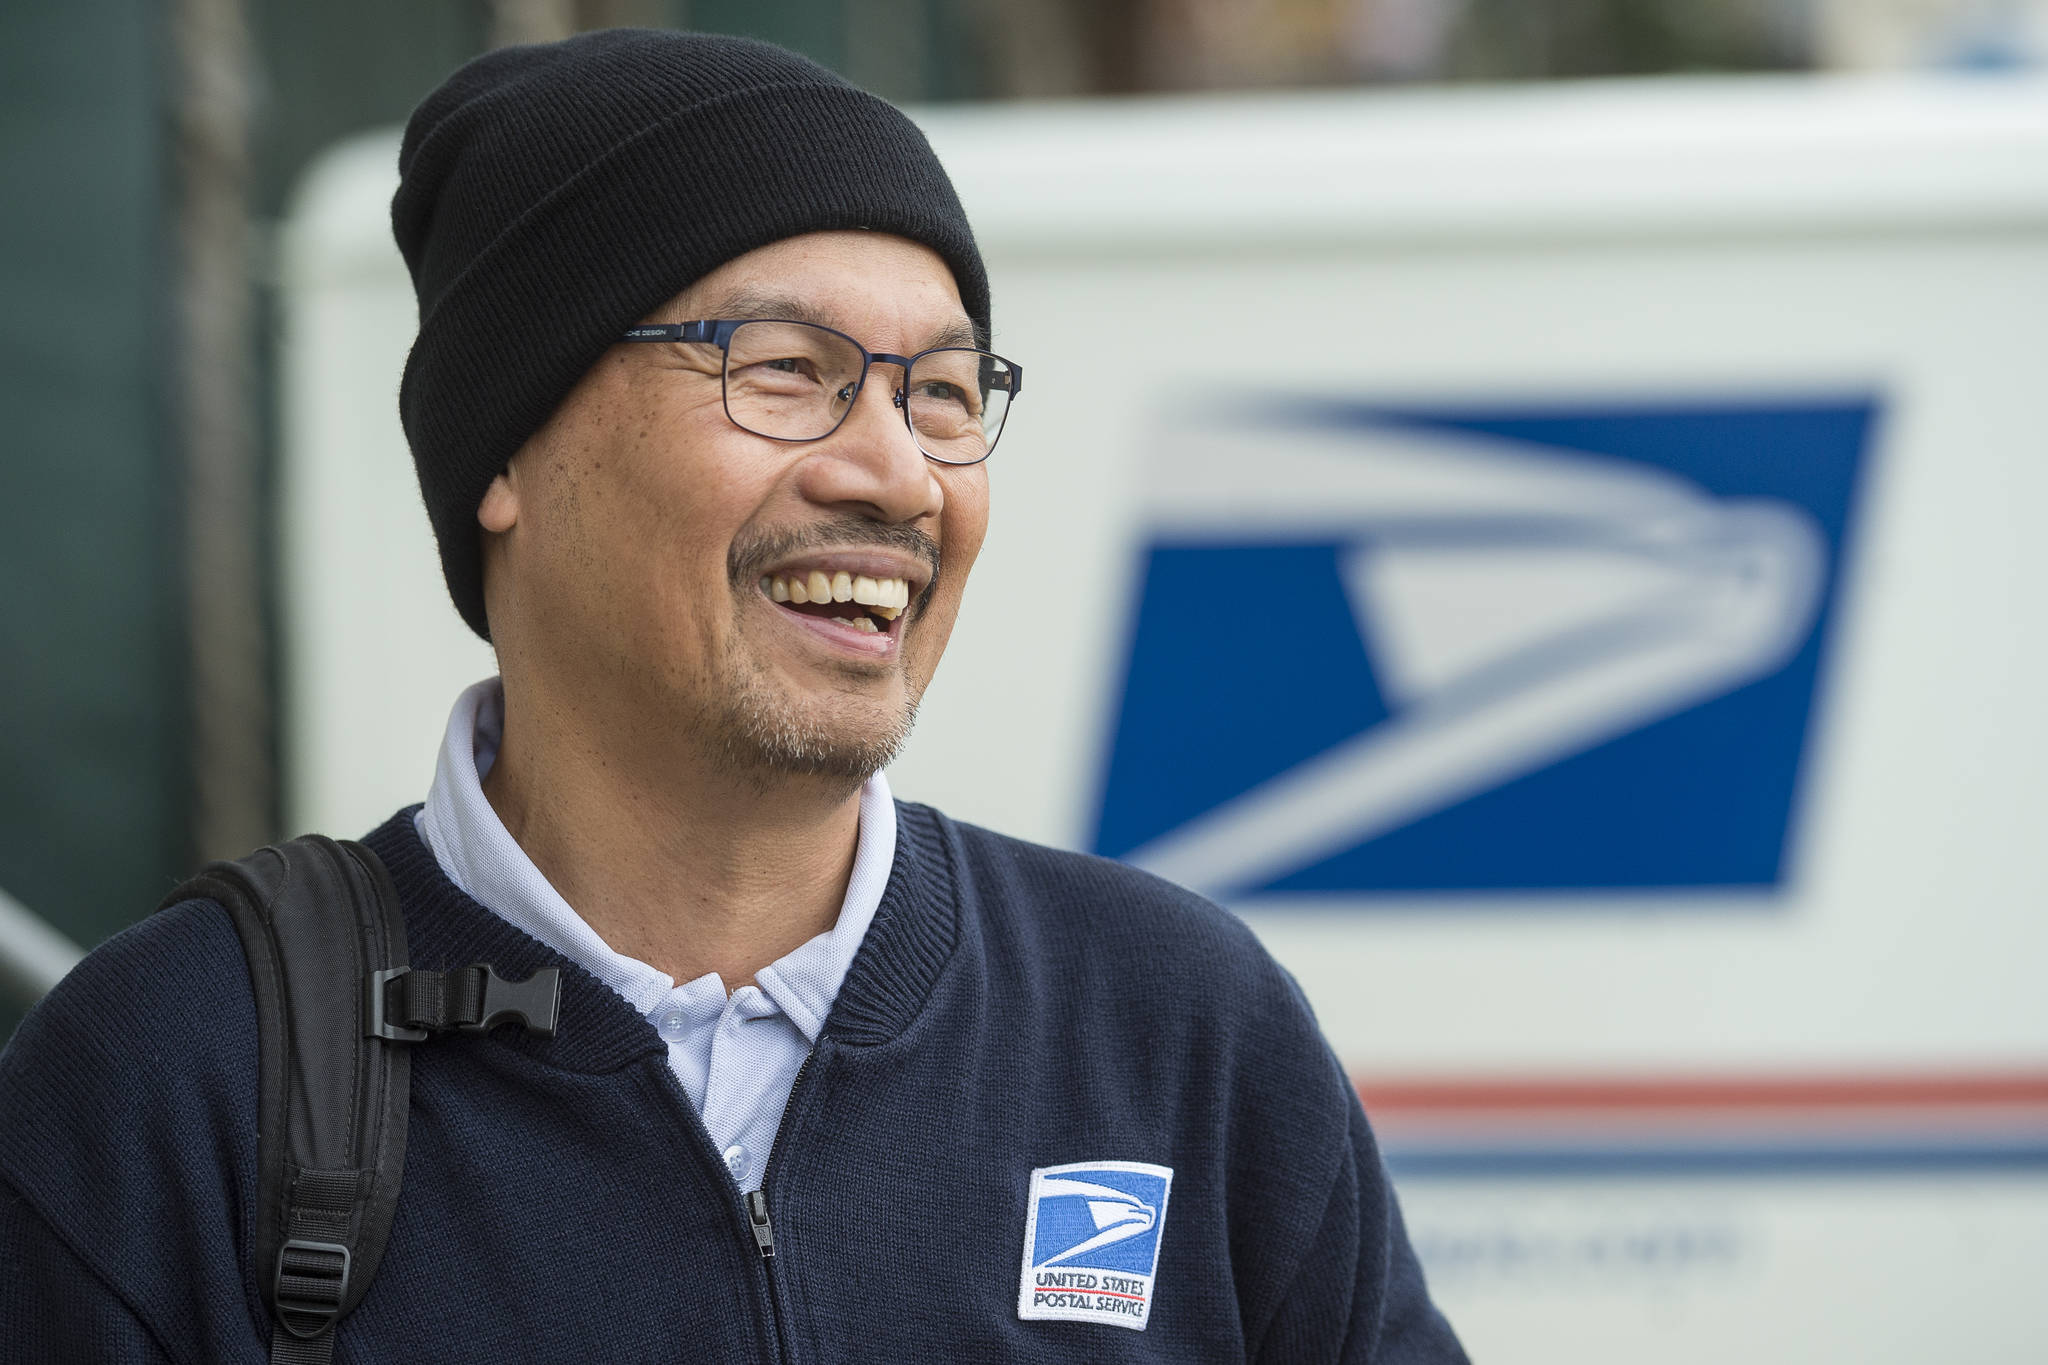 Conrado Ebron, 62, talks about working for the United States Postal Service on Tuesday, Oct. 23, 2018. Ebron is retiring as a postal carrier, mostly on the downtown route, after 33 years. (Michael Penn | Juneau Empire)